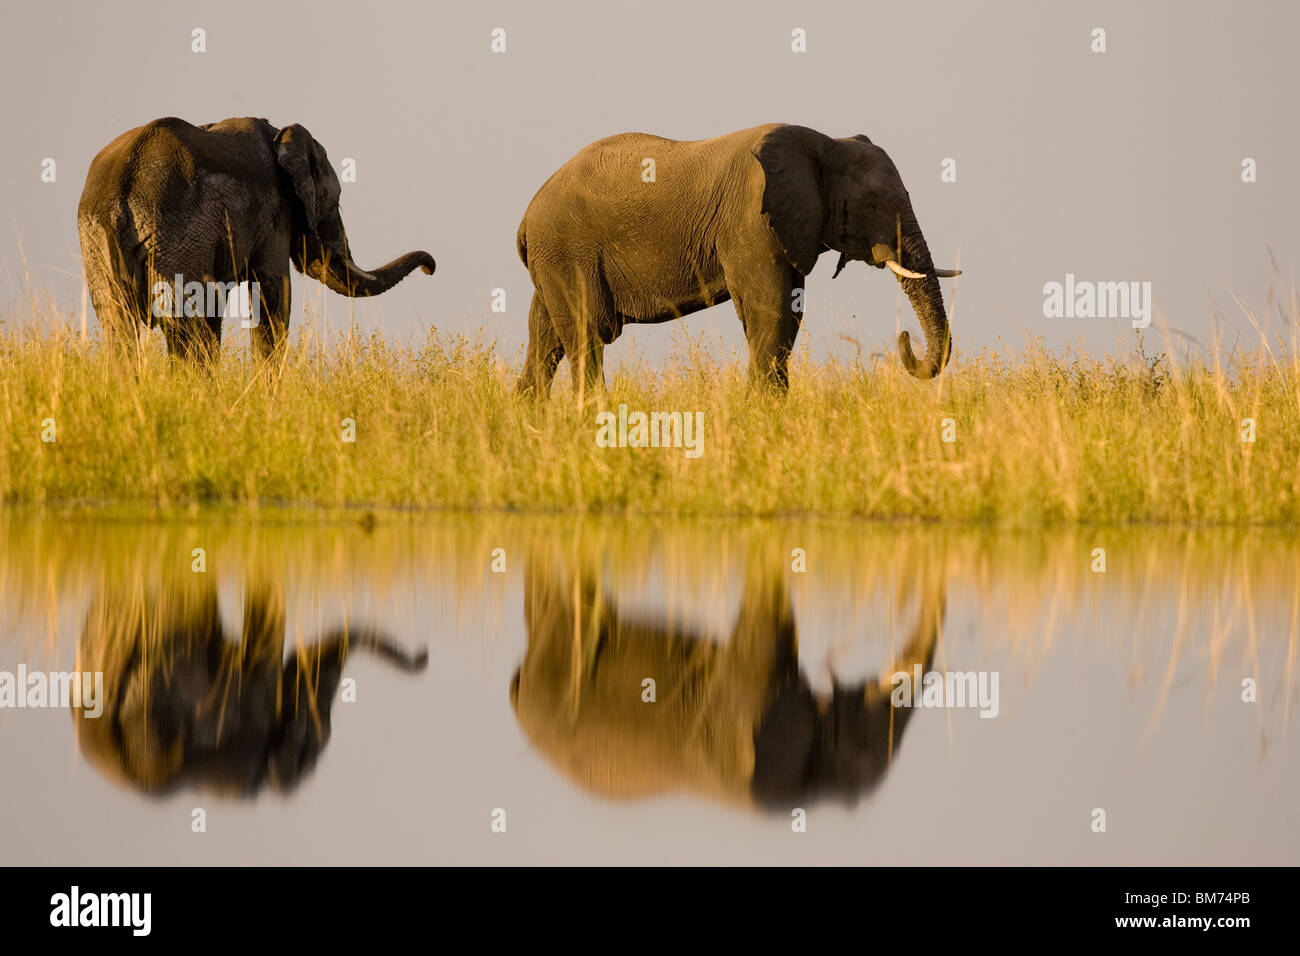 Elephant bull sniffing at cow with reflection in river, Chobe Stock Photo